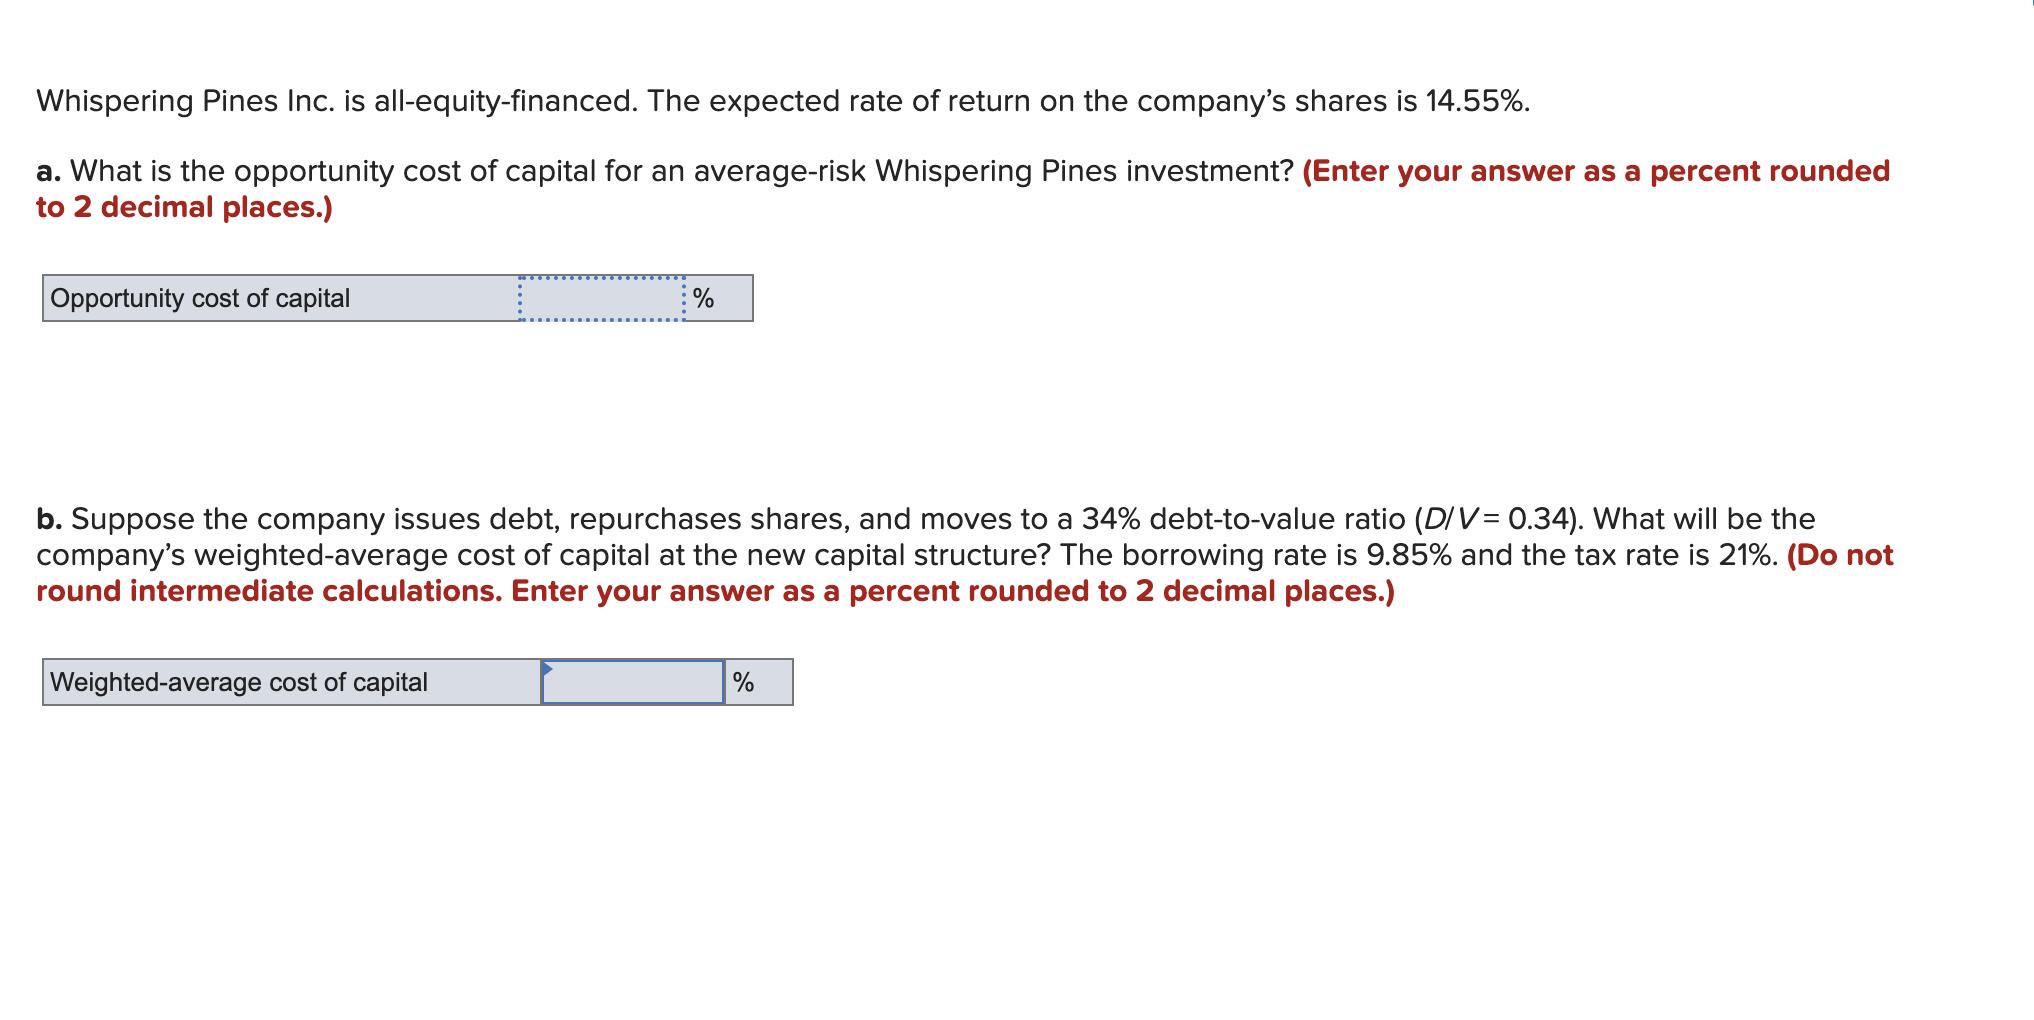 Whispering Pines Inc. is all-equity-financed. The expected rate of return on the companys shares is ( 14.55 % ). a. What